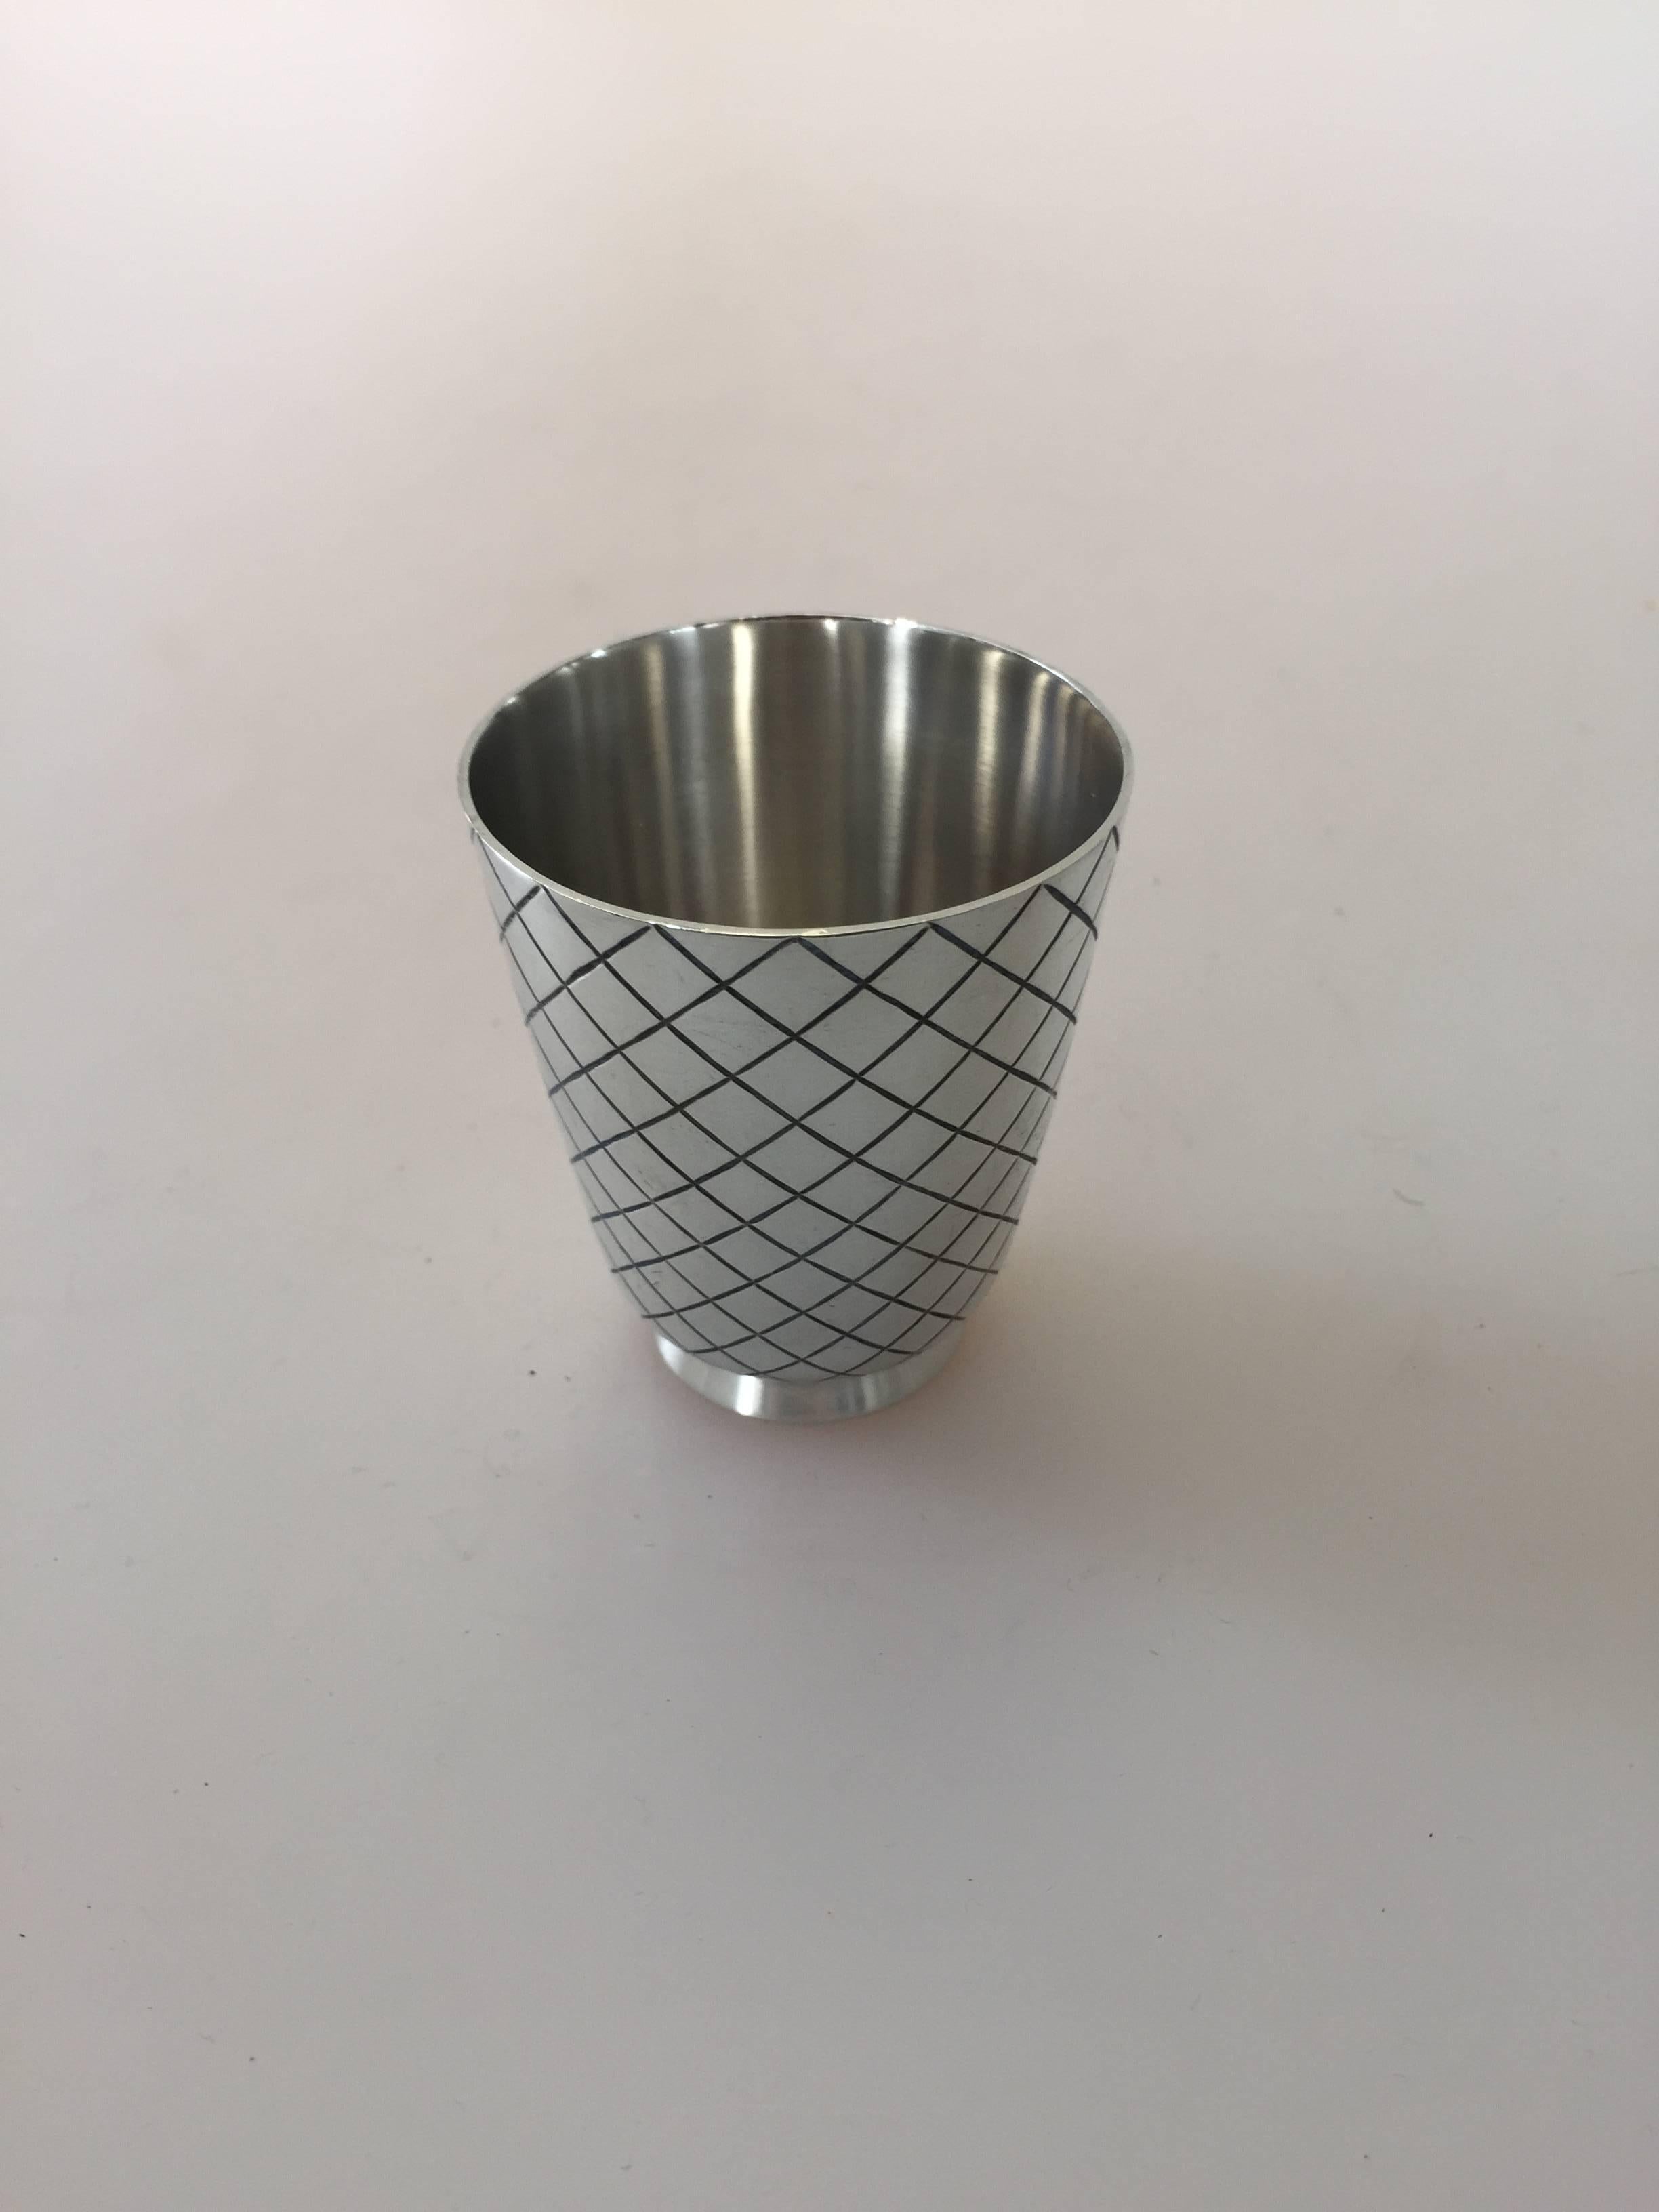 Georg Jensen sterling silver Sigvard Bernadotte cocktail cup #819. This elegant cup measures 5.8 cm and is in a good condition. We have several in stock.

As a designer Prince Sigvard Bernadotte (1907-2002) had a long and fruitful cooperation with